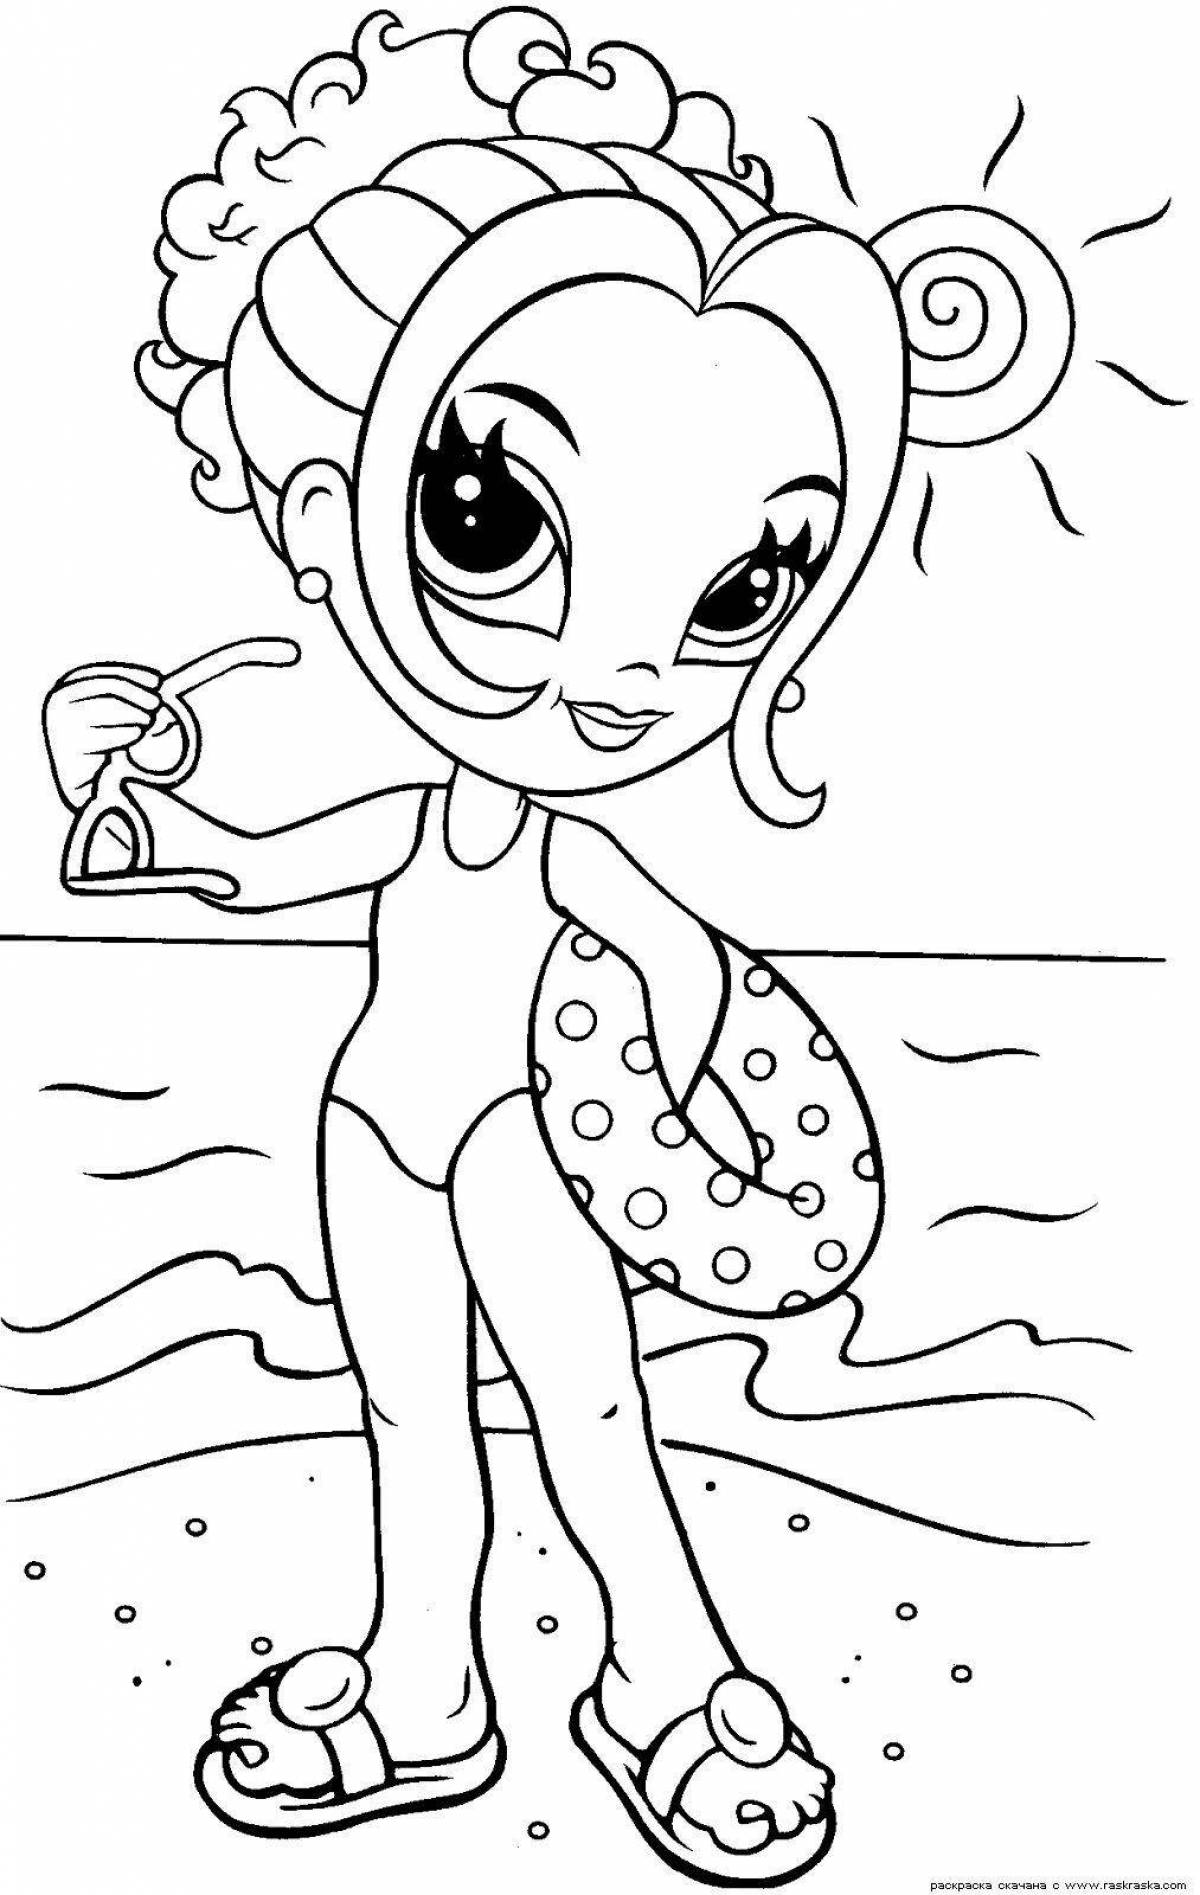 Color-frenzy coloring page for girls 6-7 years old